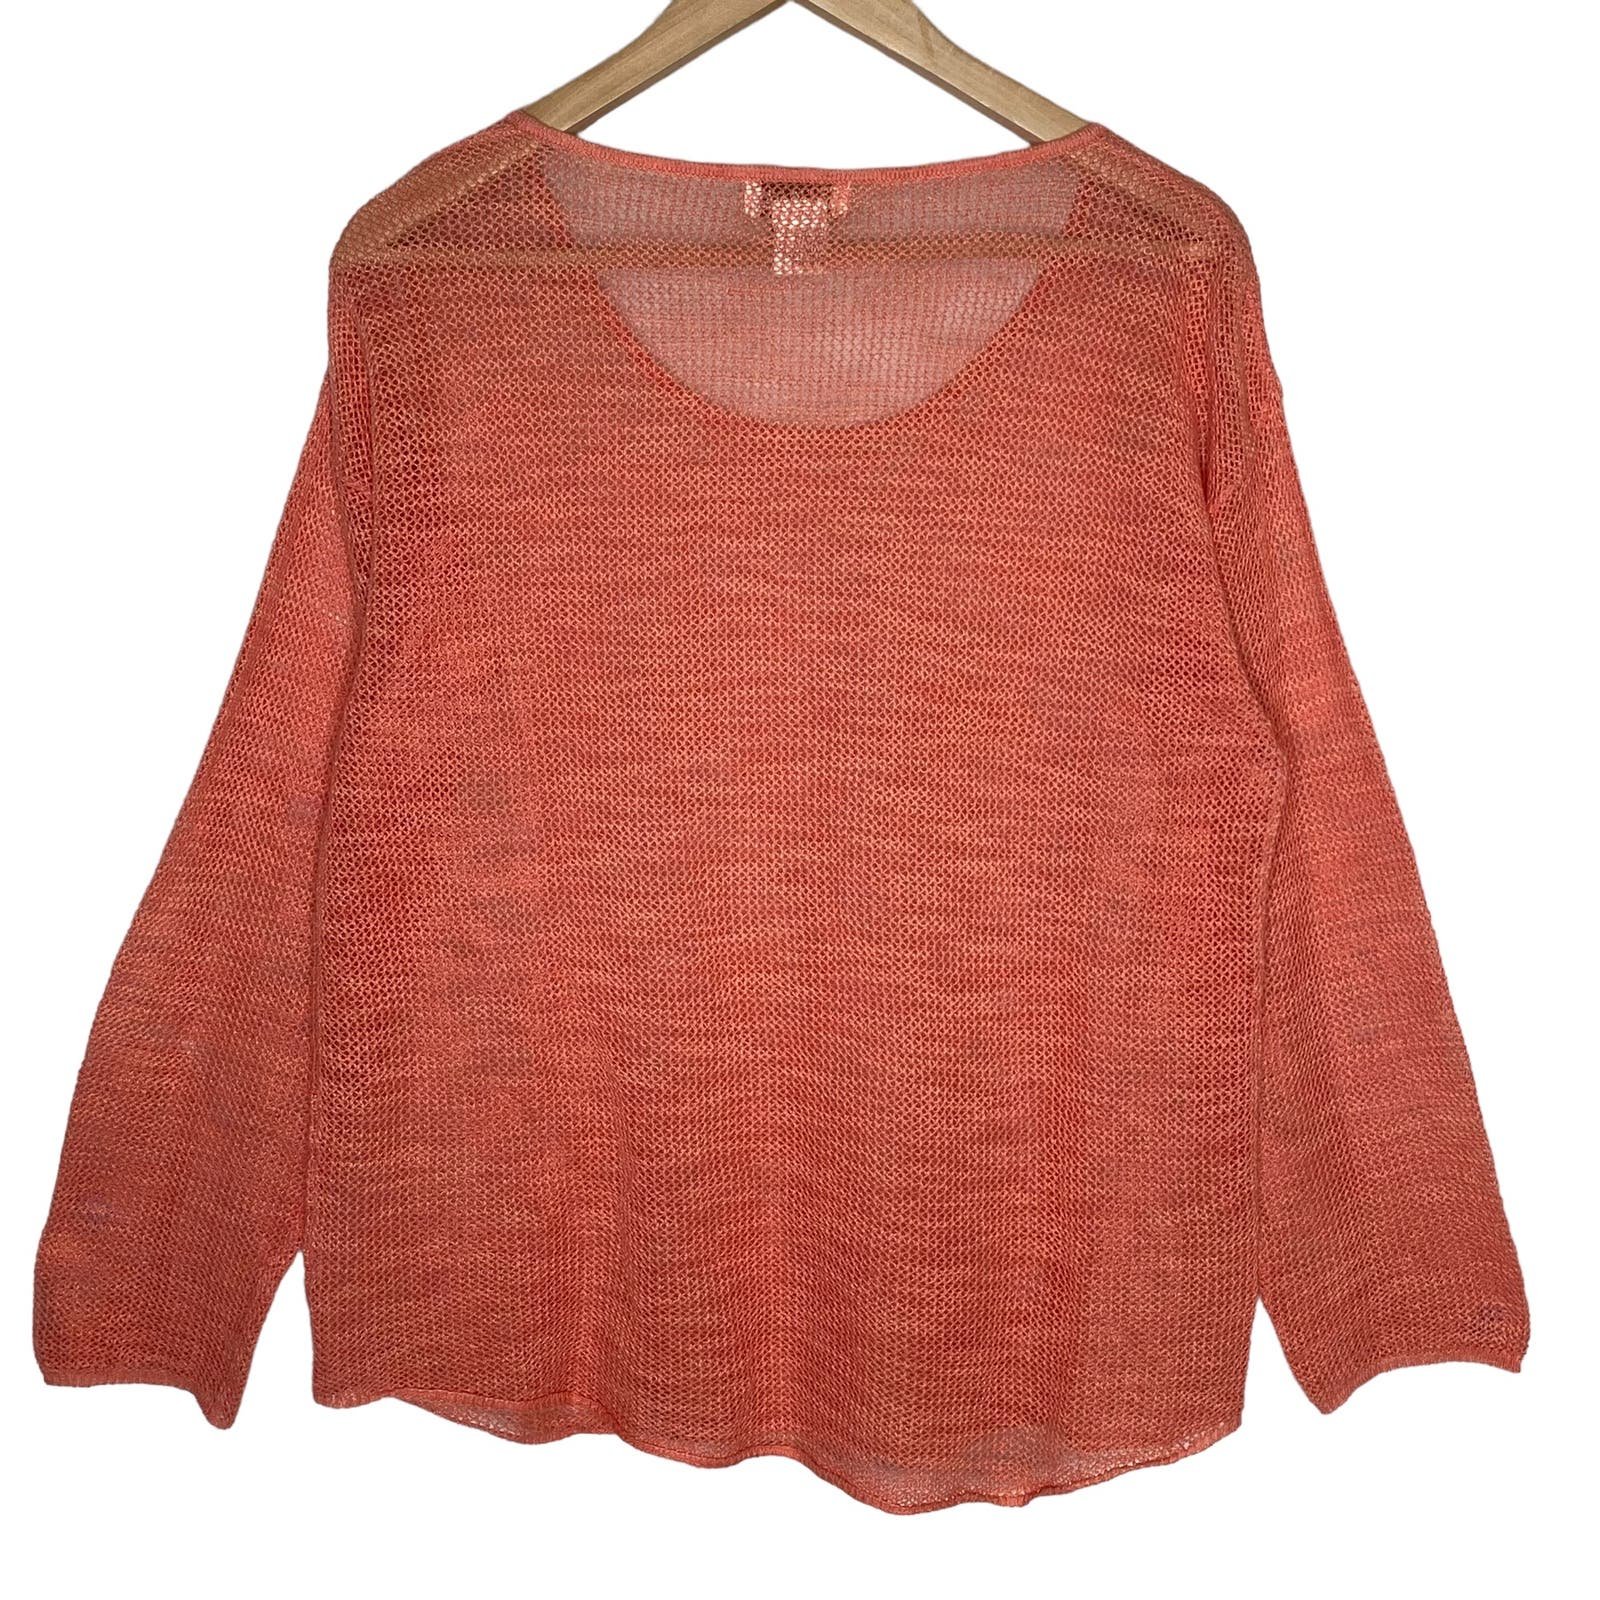 cheapest place to buy  Bloom Linen Blend Sweater Open Knit Coral Scoop Neck Pullover Long Sleeve, Large KwwOedQFQ online store